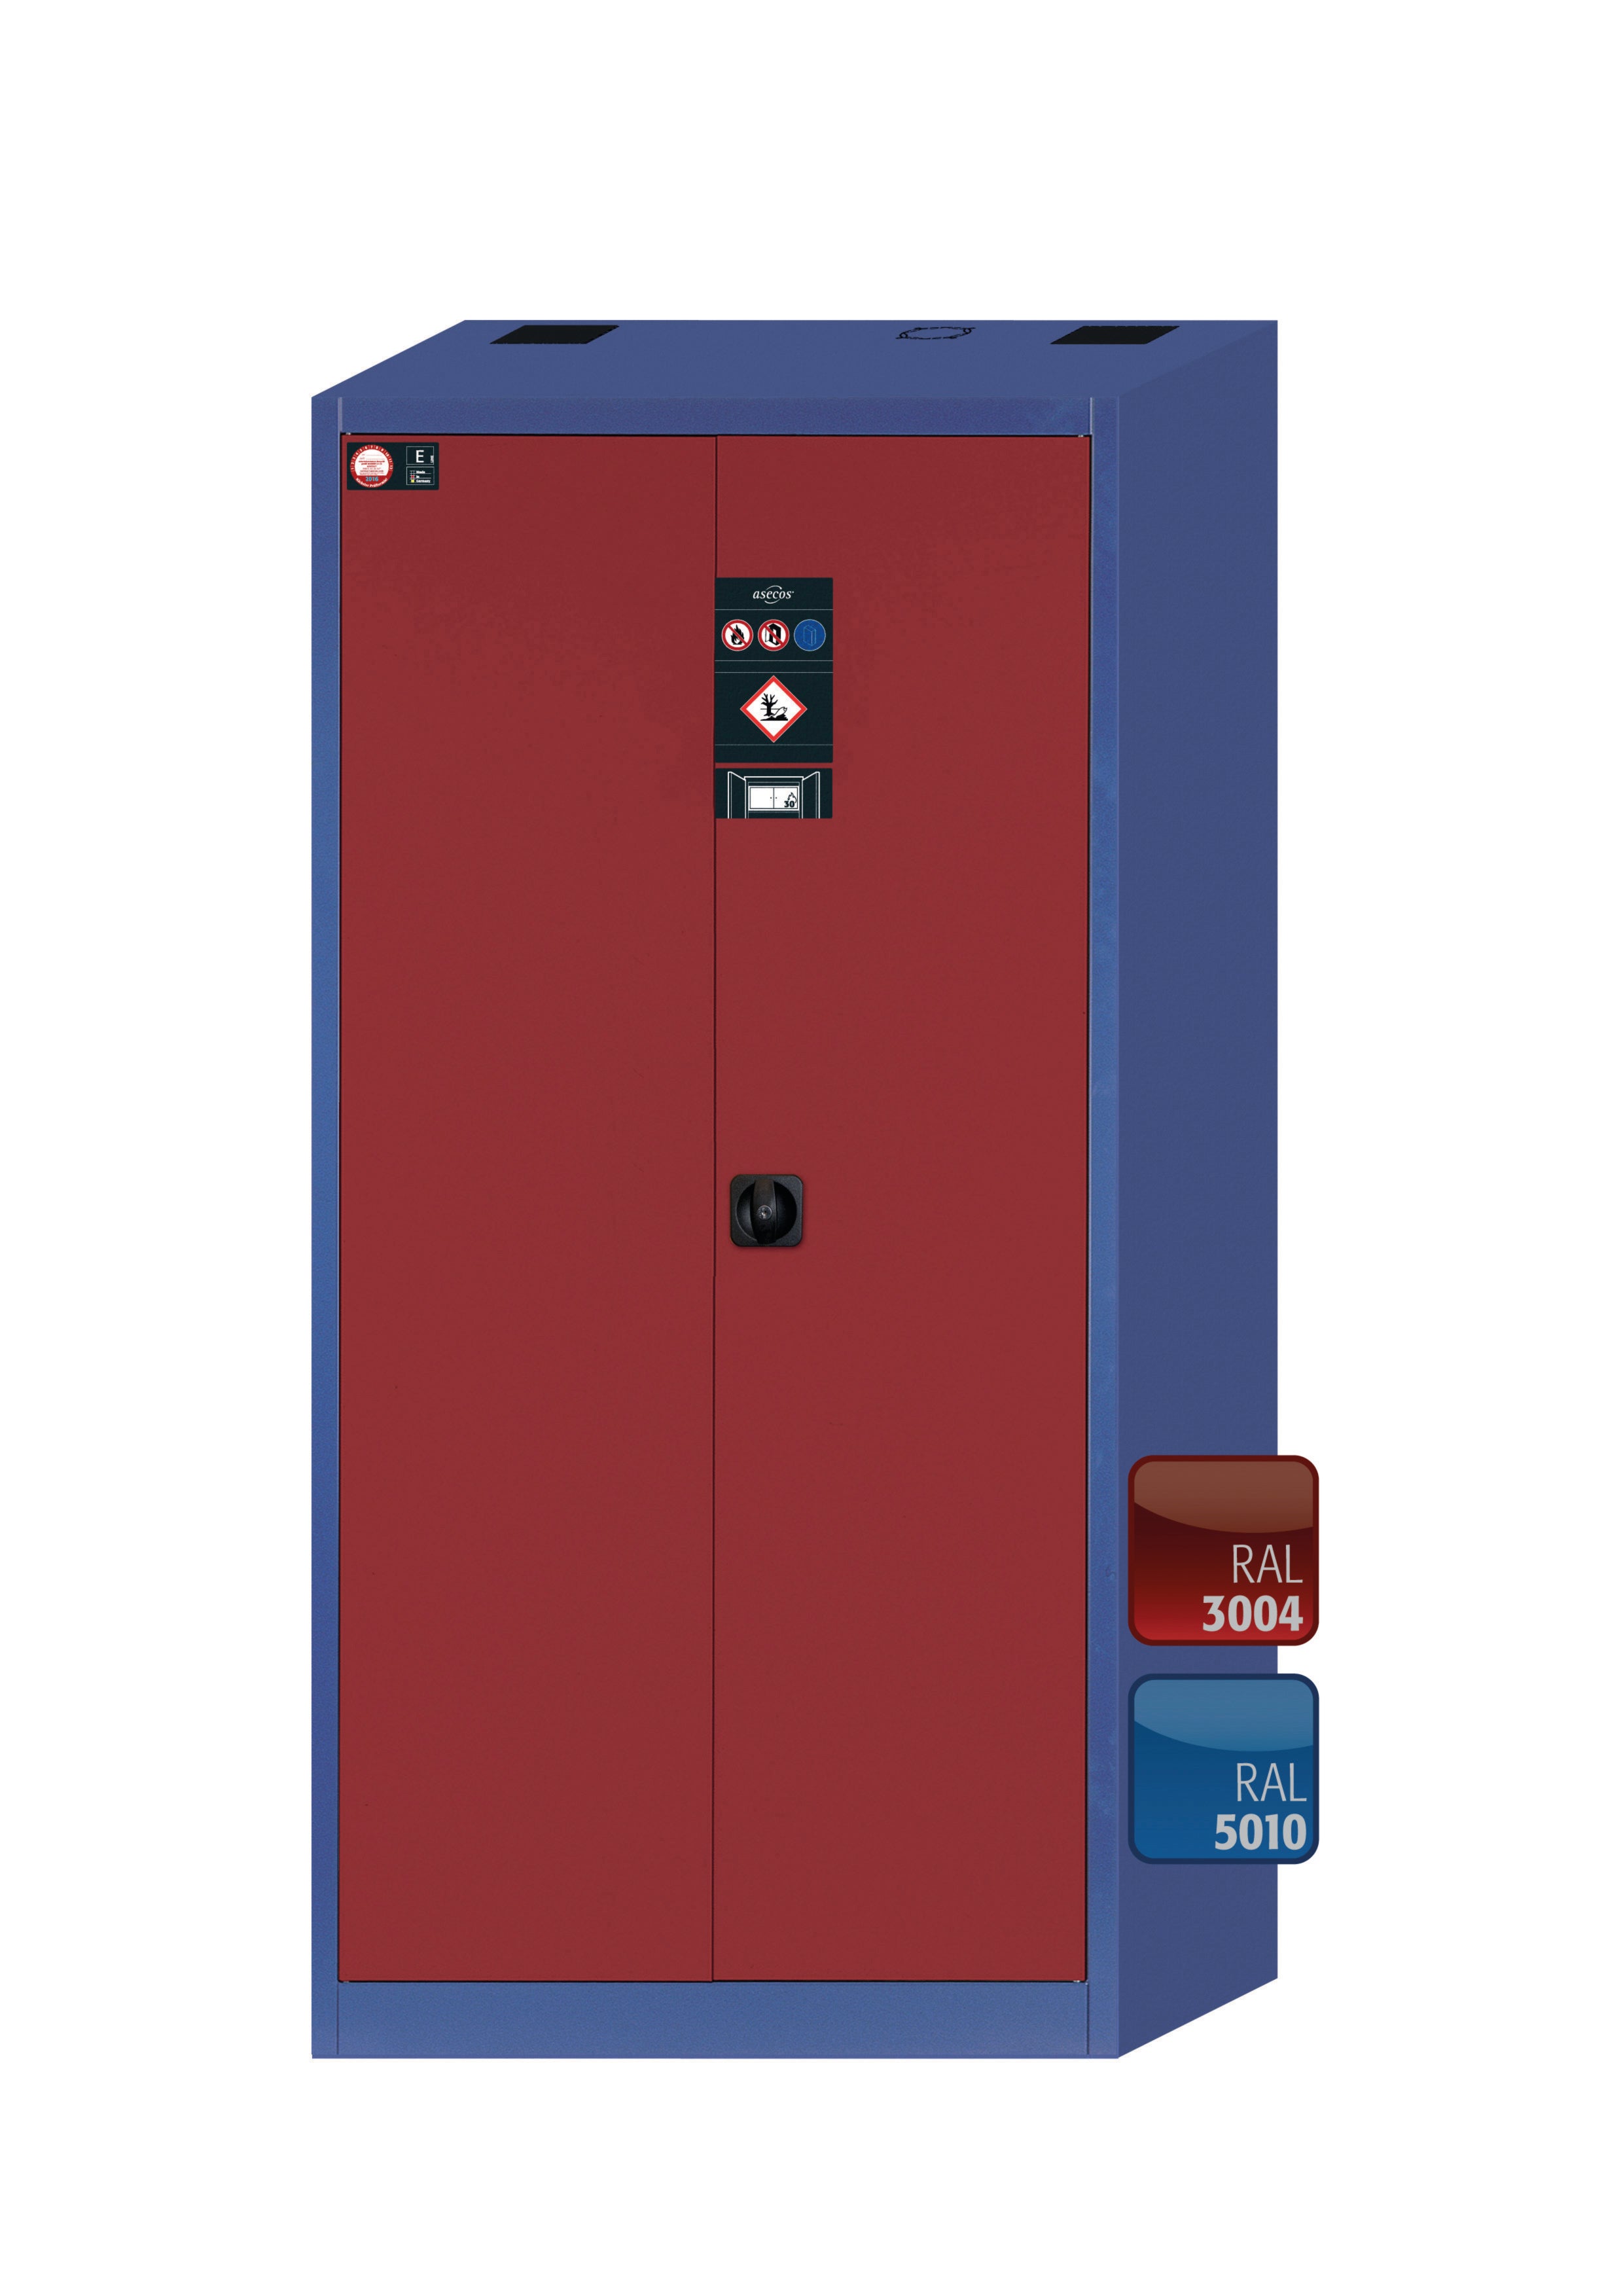 Environmental cabinet E-CLASSIC-UF model E.195.095.F2 (àœHP equipment incl. Type 30 box) in purple red RAL 3004 with 2x tray base STAWA-R (sheet steel)